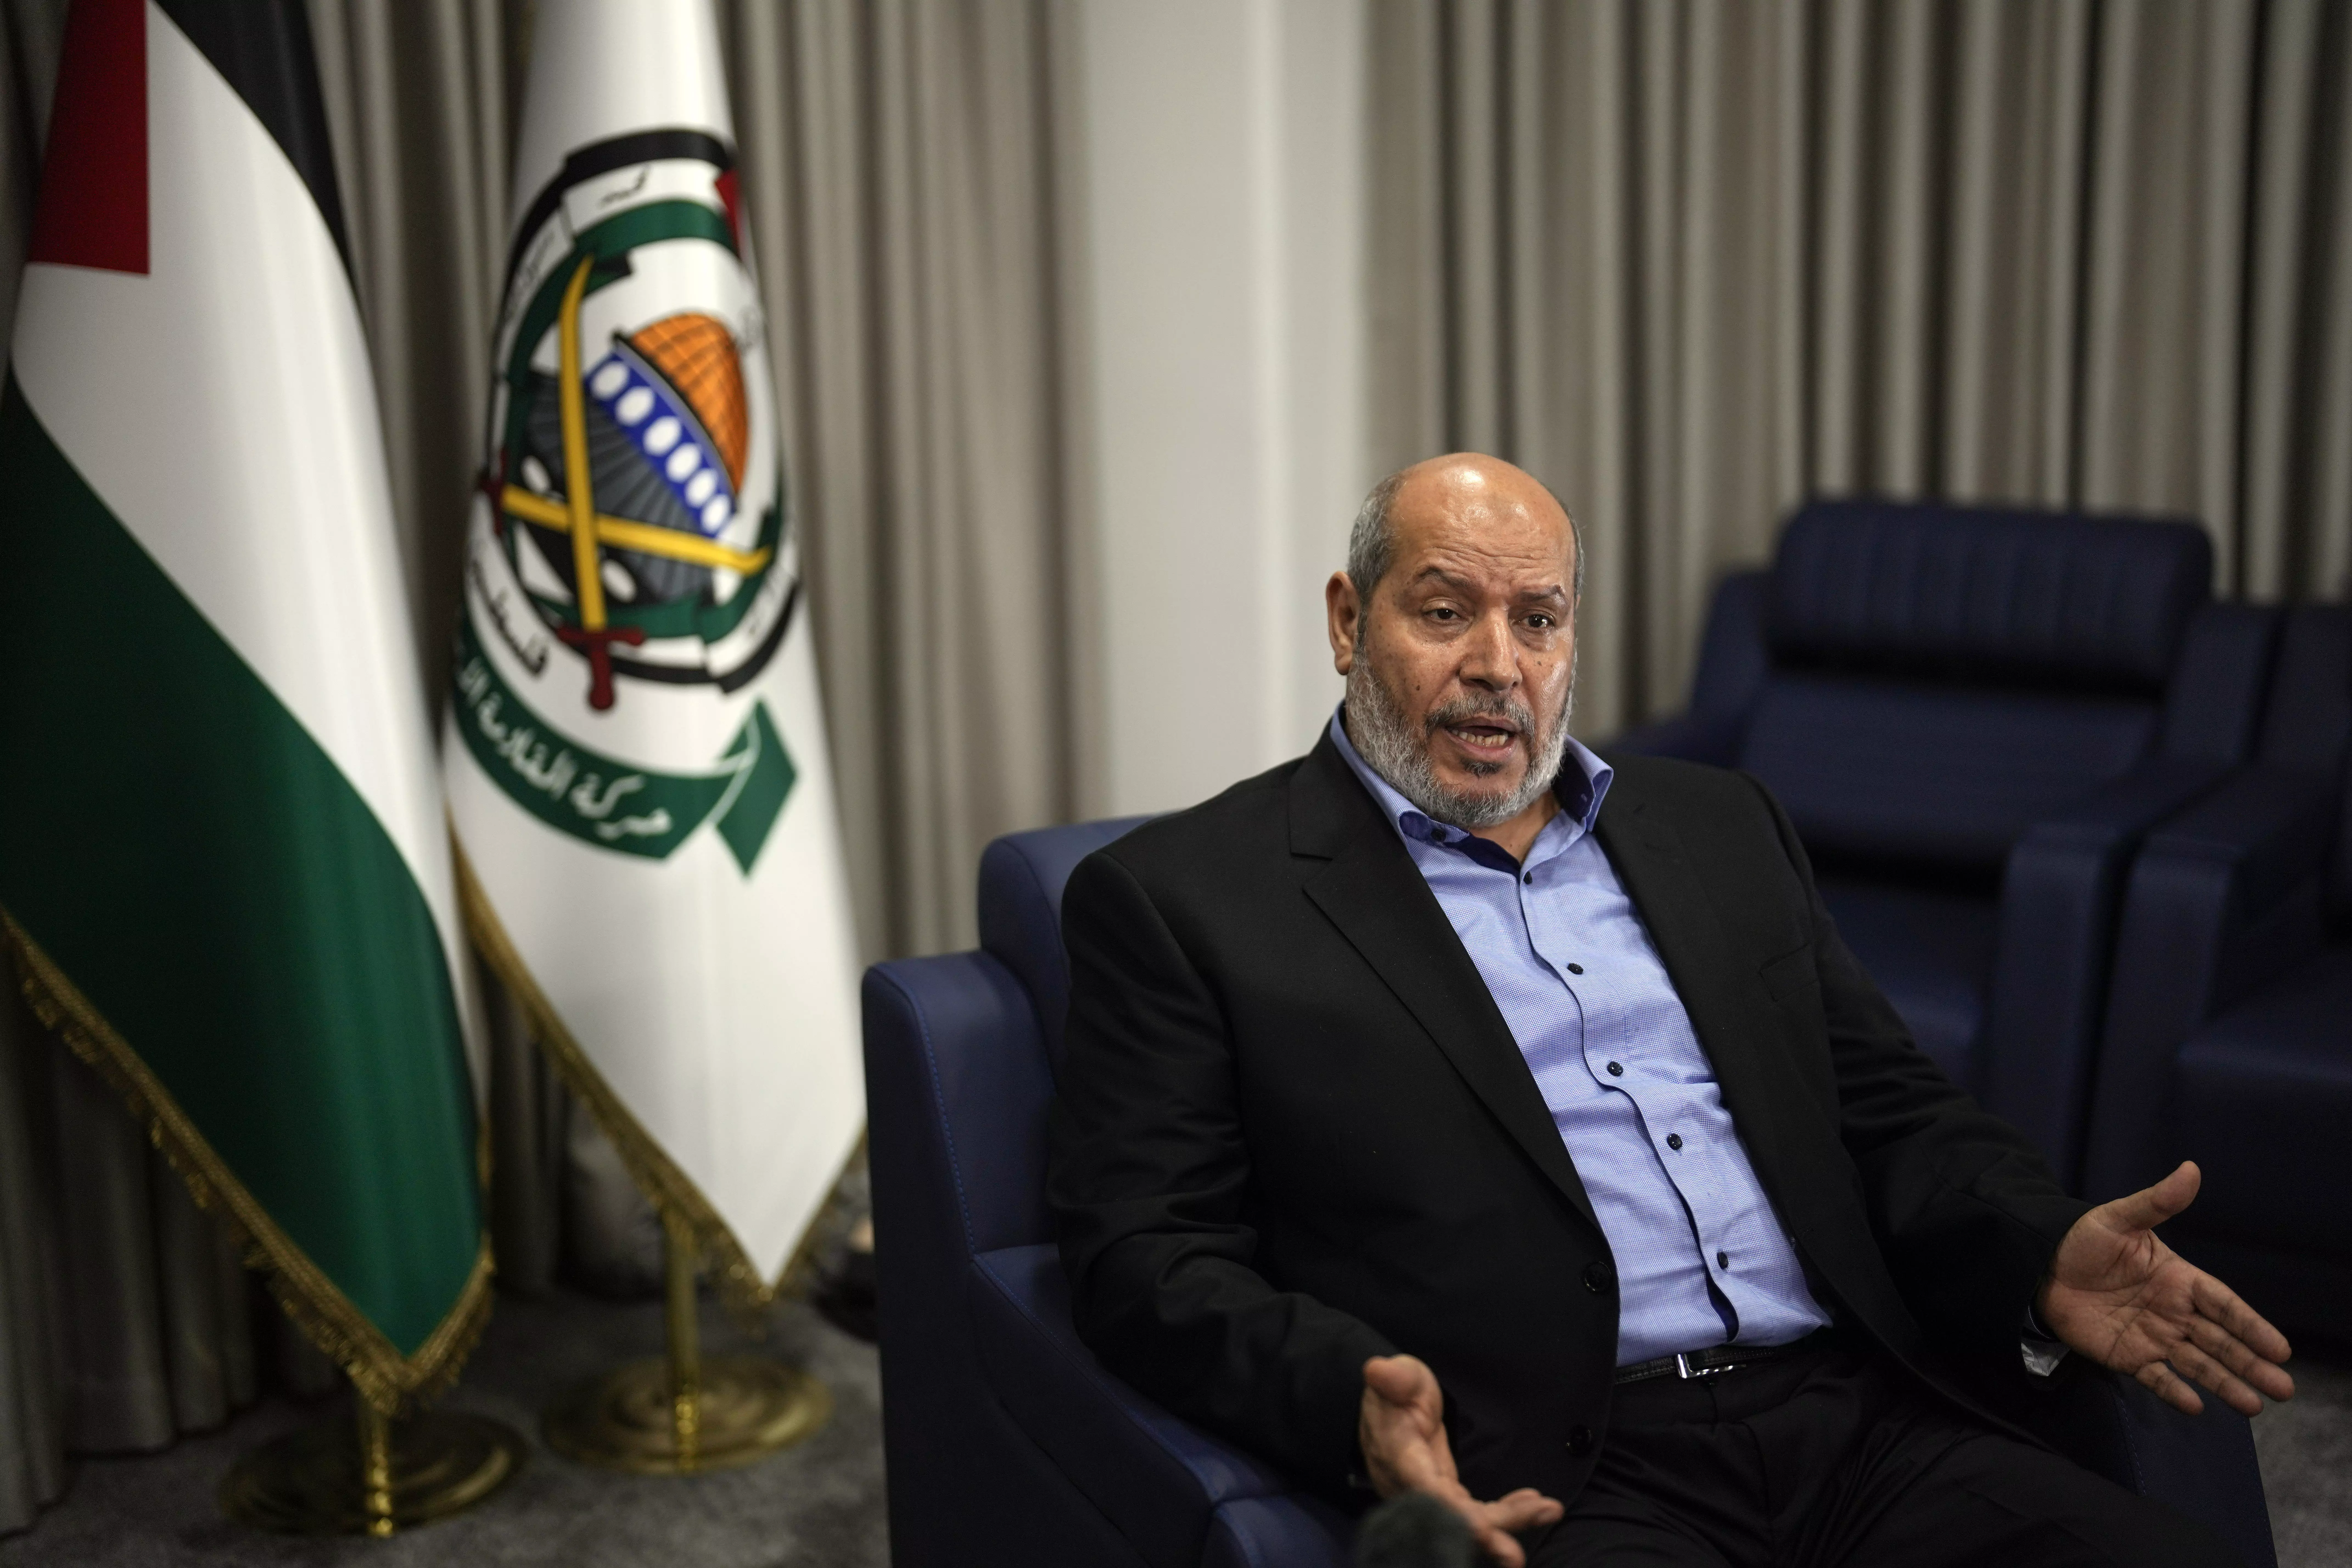 Will lay down weapons if a two-state solution is implemented: Hamas